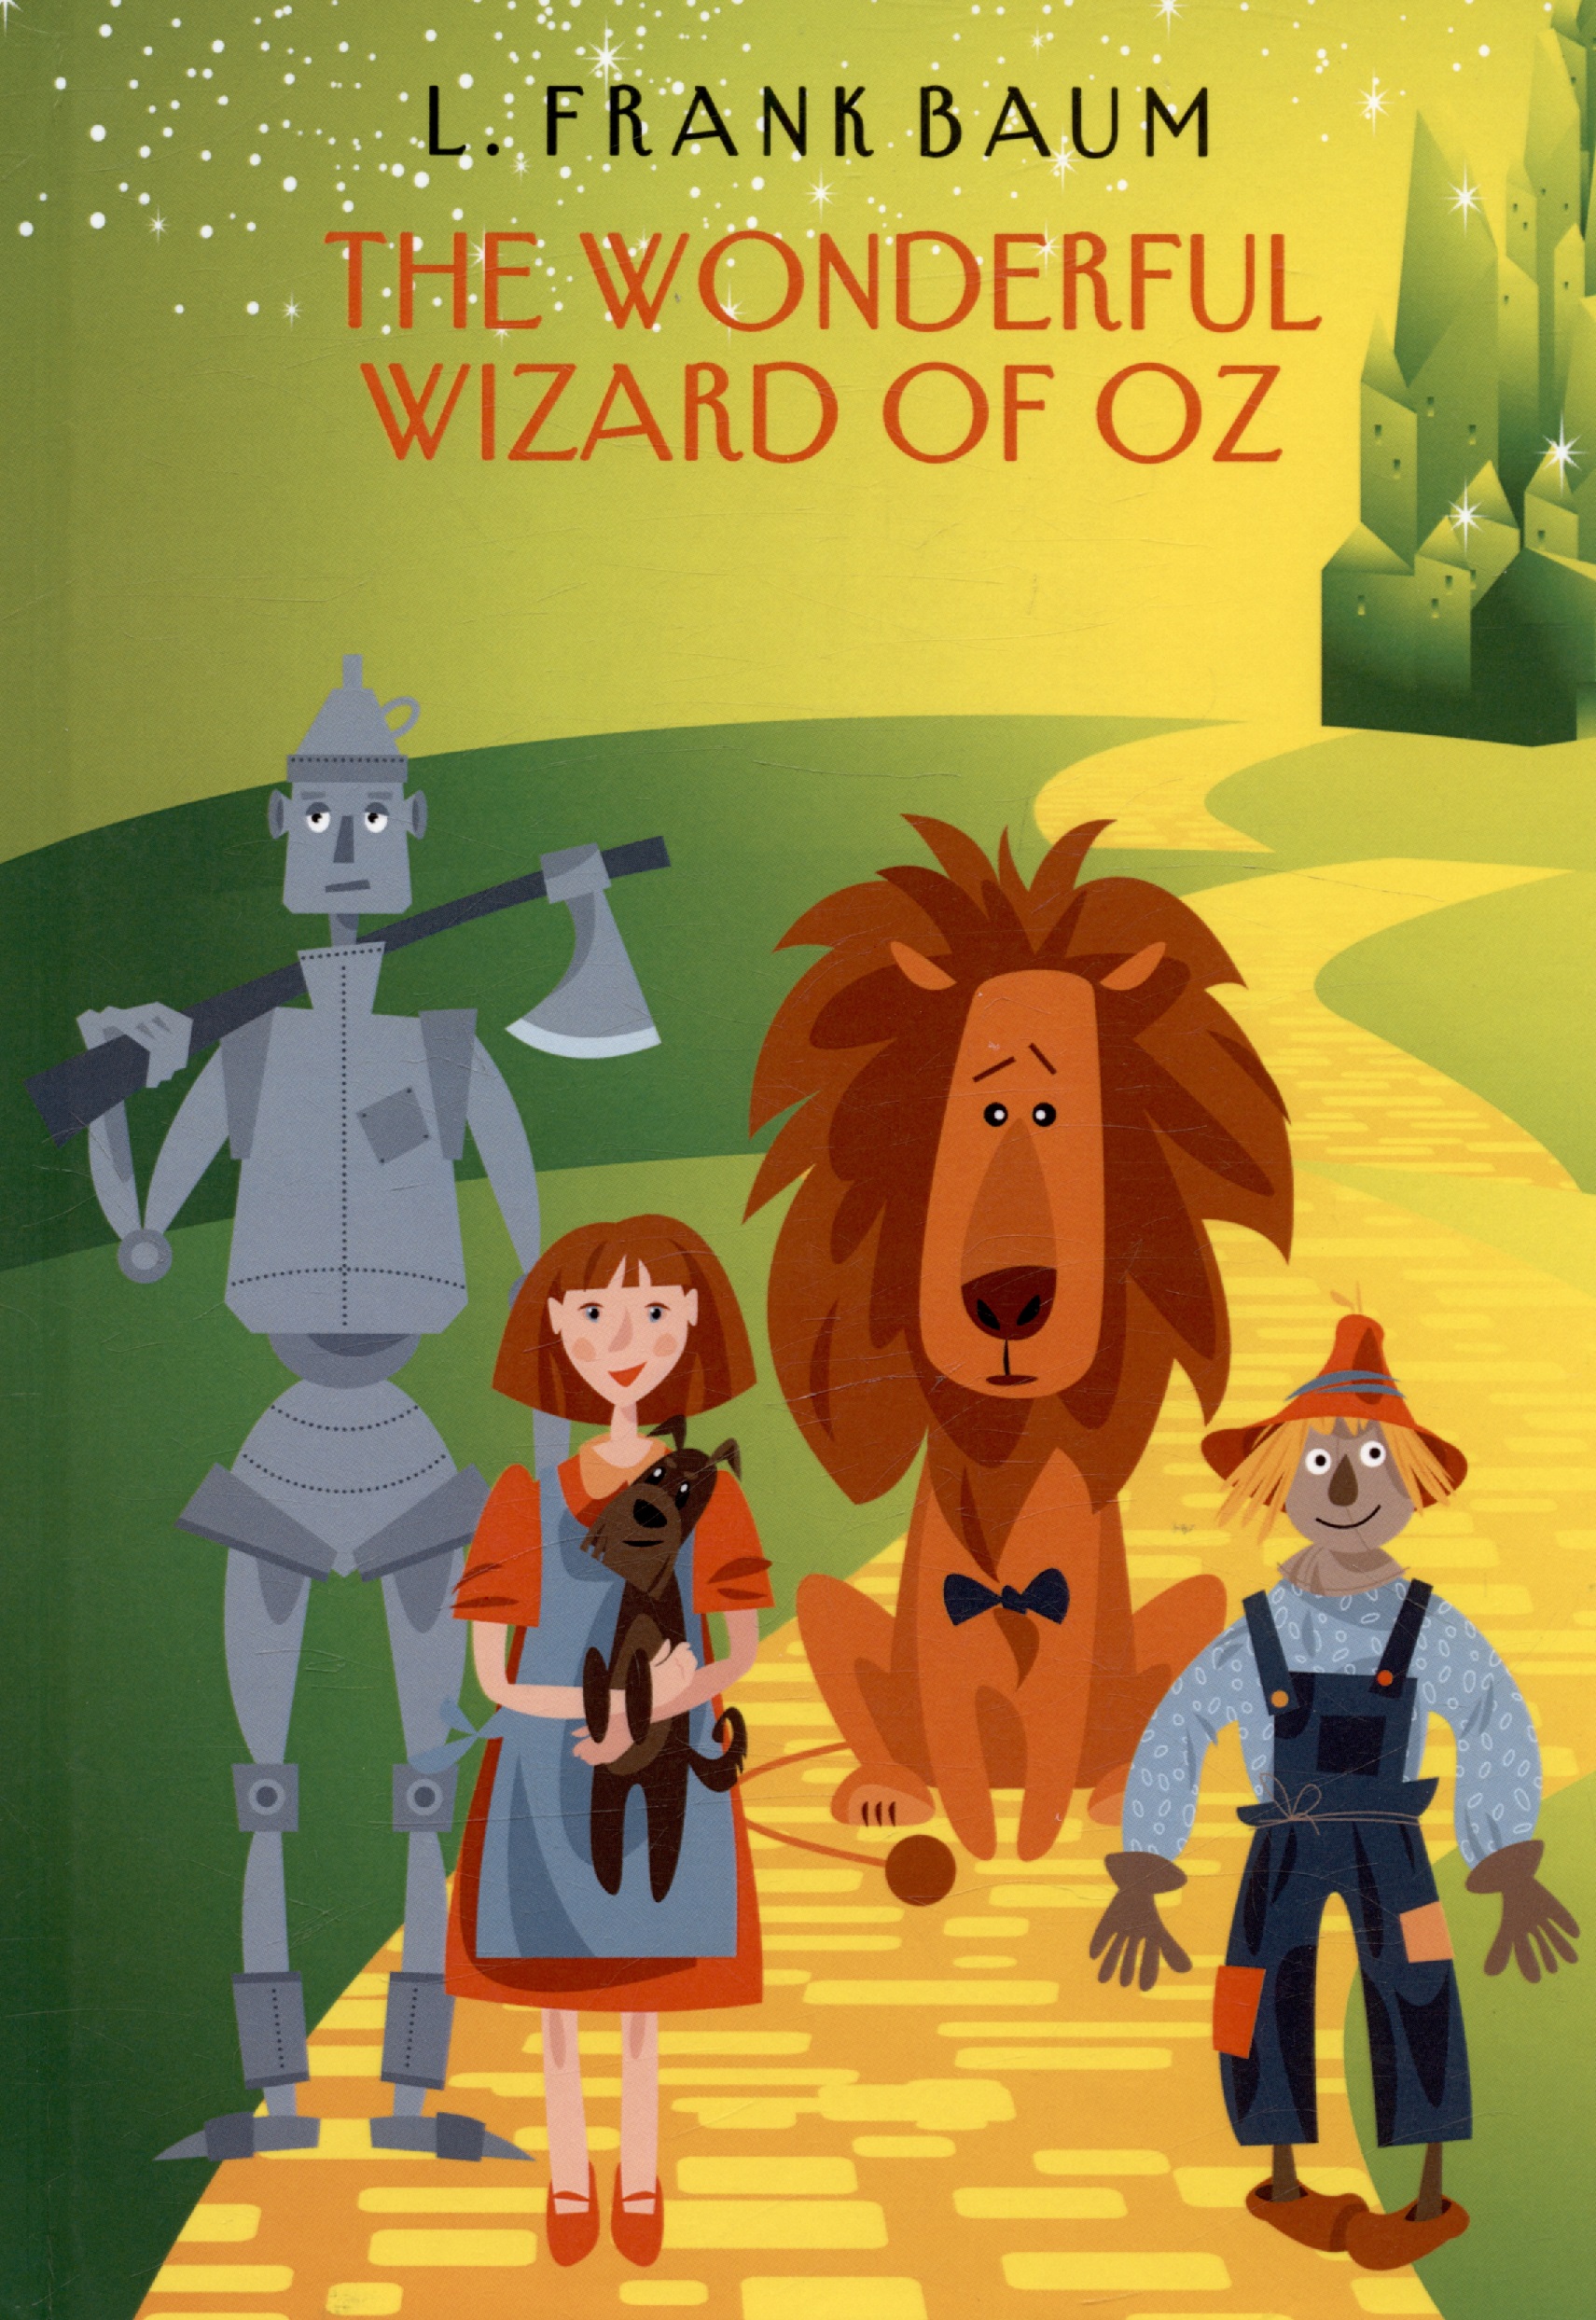 Баум Лаймен Фрэнк Лаймен The Wonderful Wizard of Oz morpurgo michael toto the wizard of oz as told by the dog